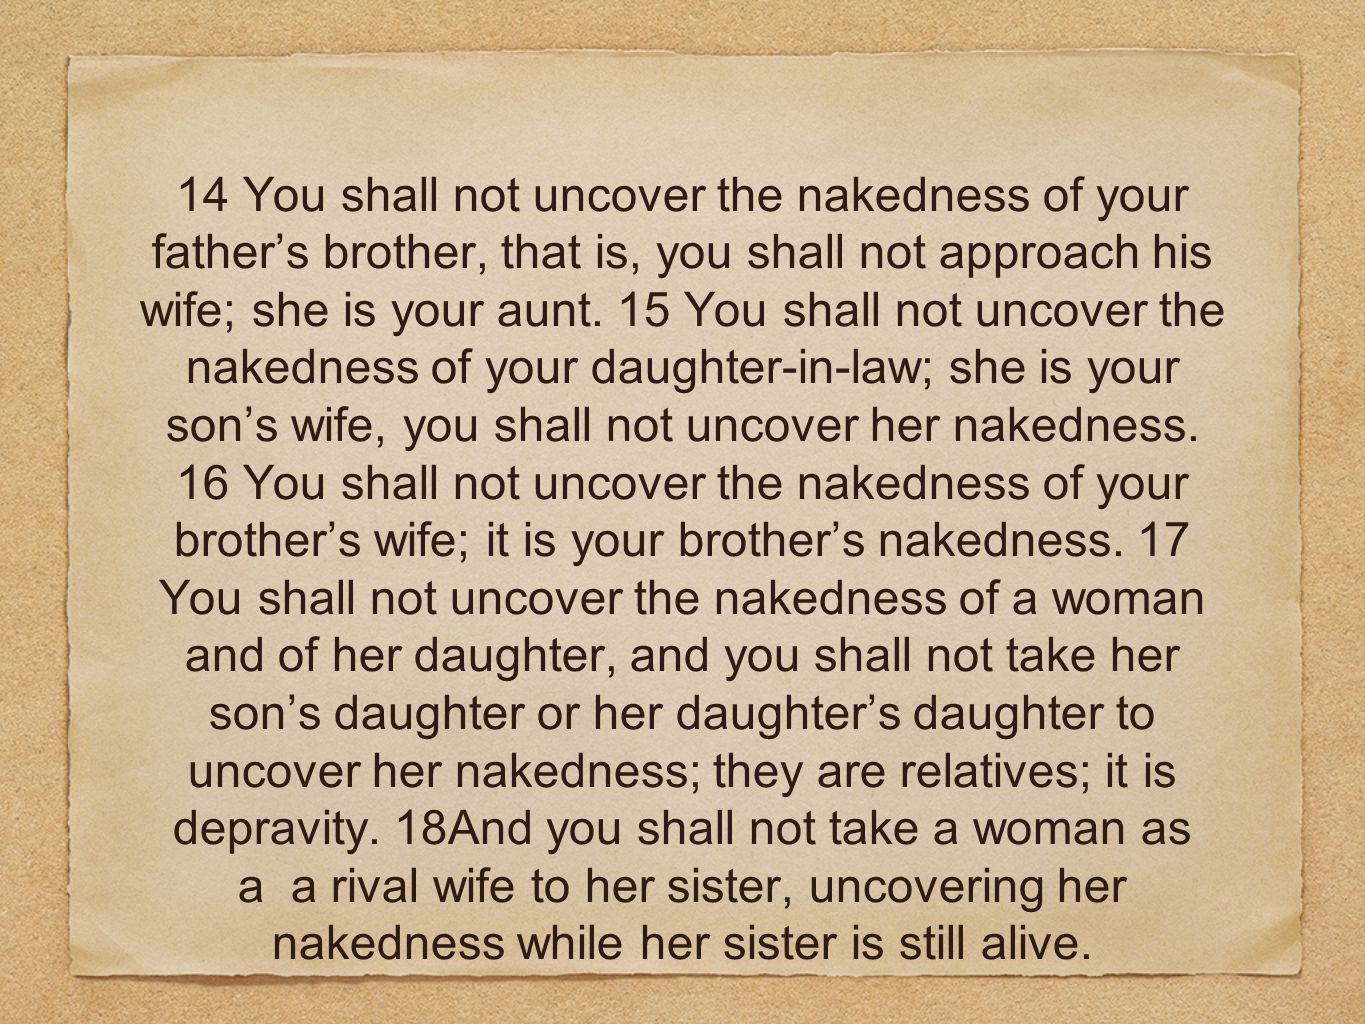 14 You shall not uncover the nakedness of your father’s brother, that is, you shall not approach his wife; she is your aunt.